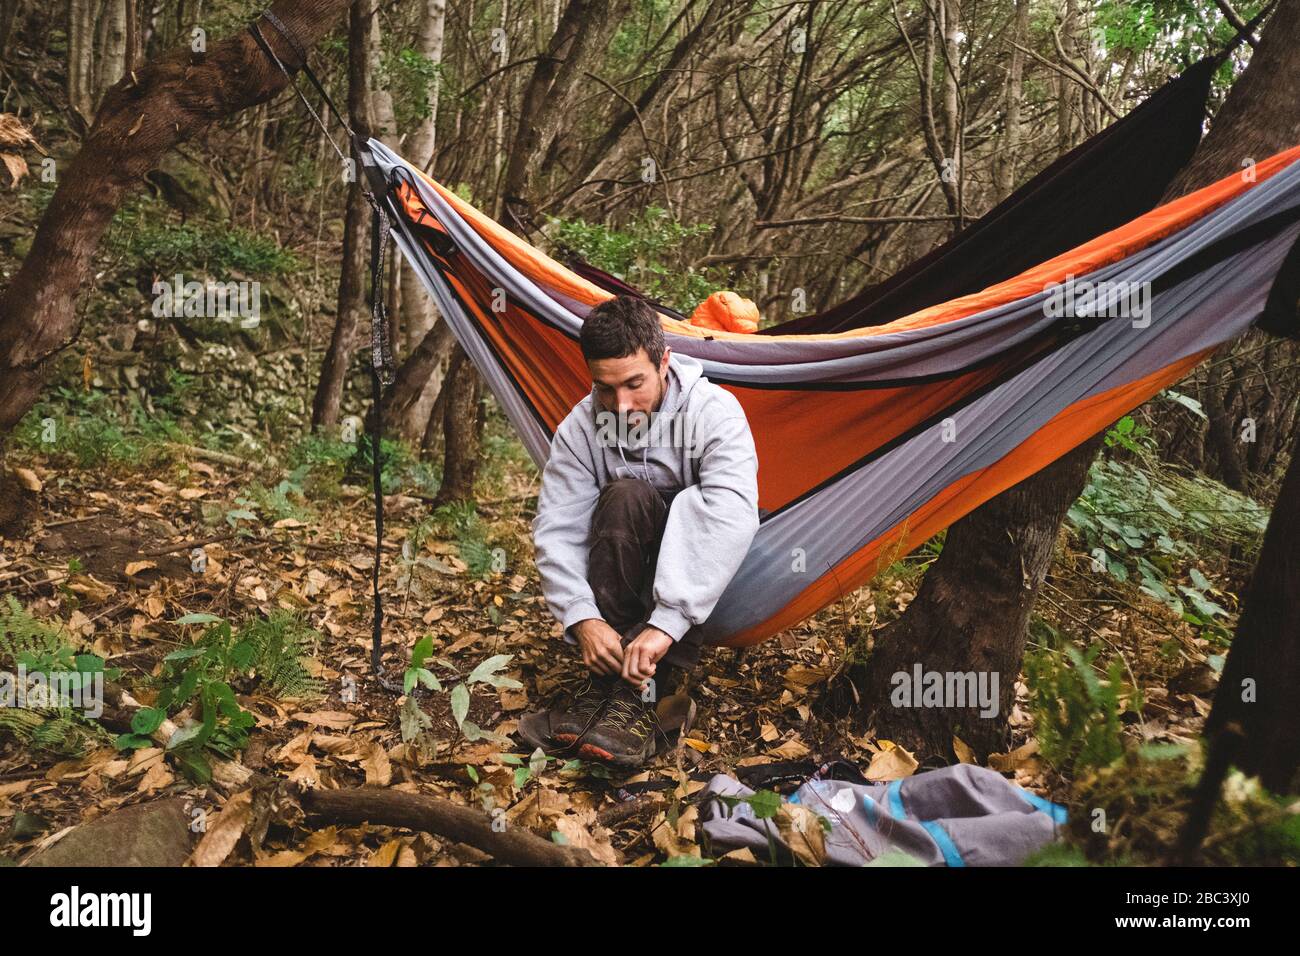 A man prepares for a hike sitting in a hammock in the forest Stock Photo